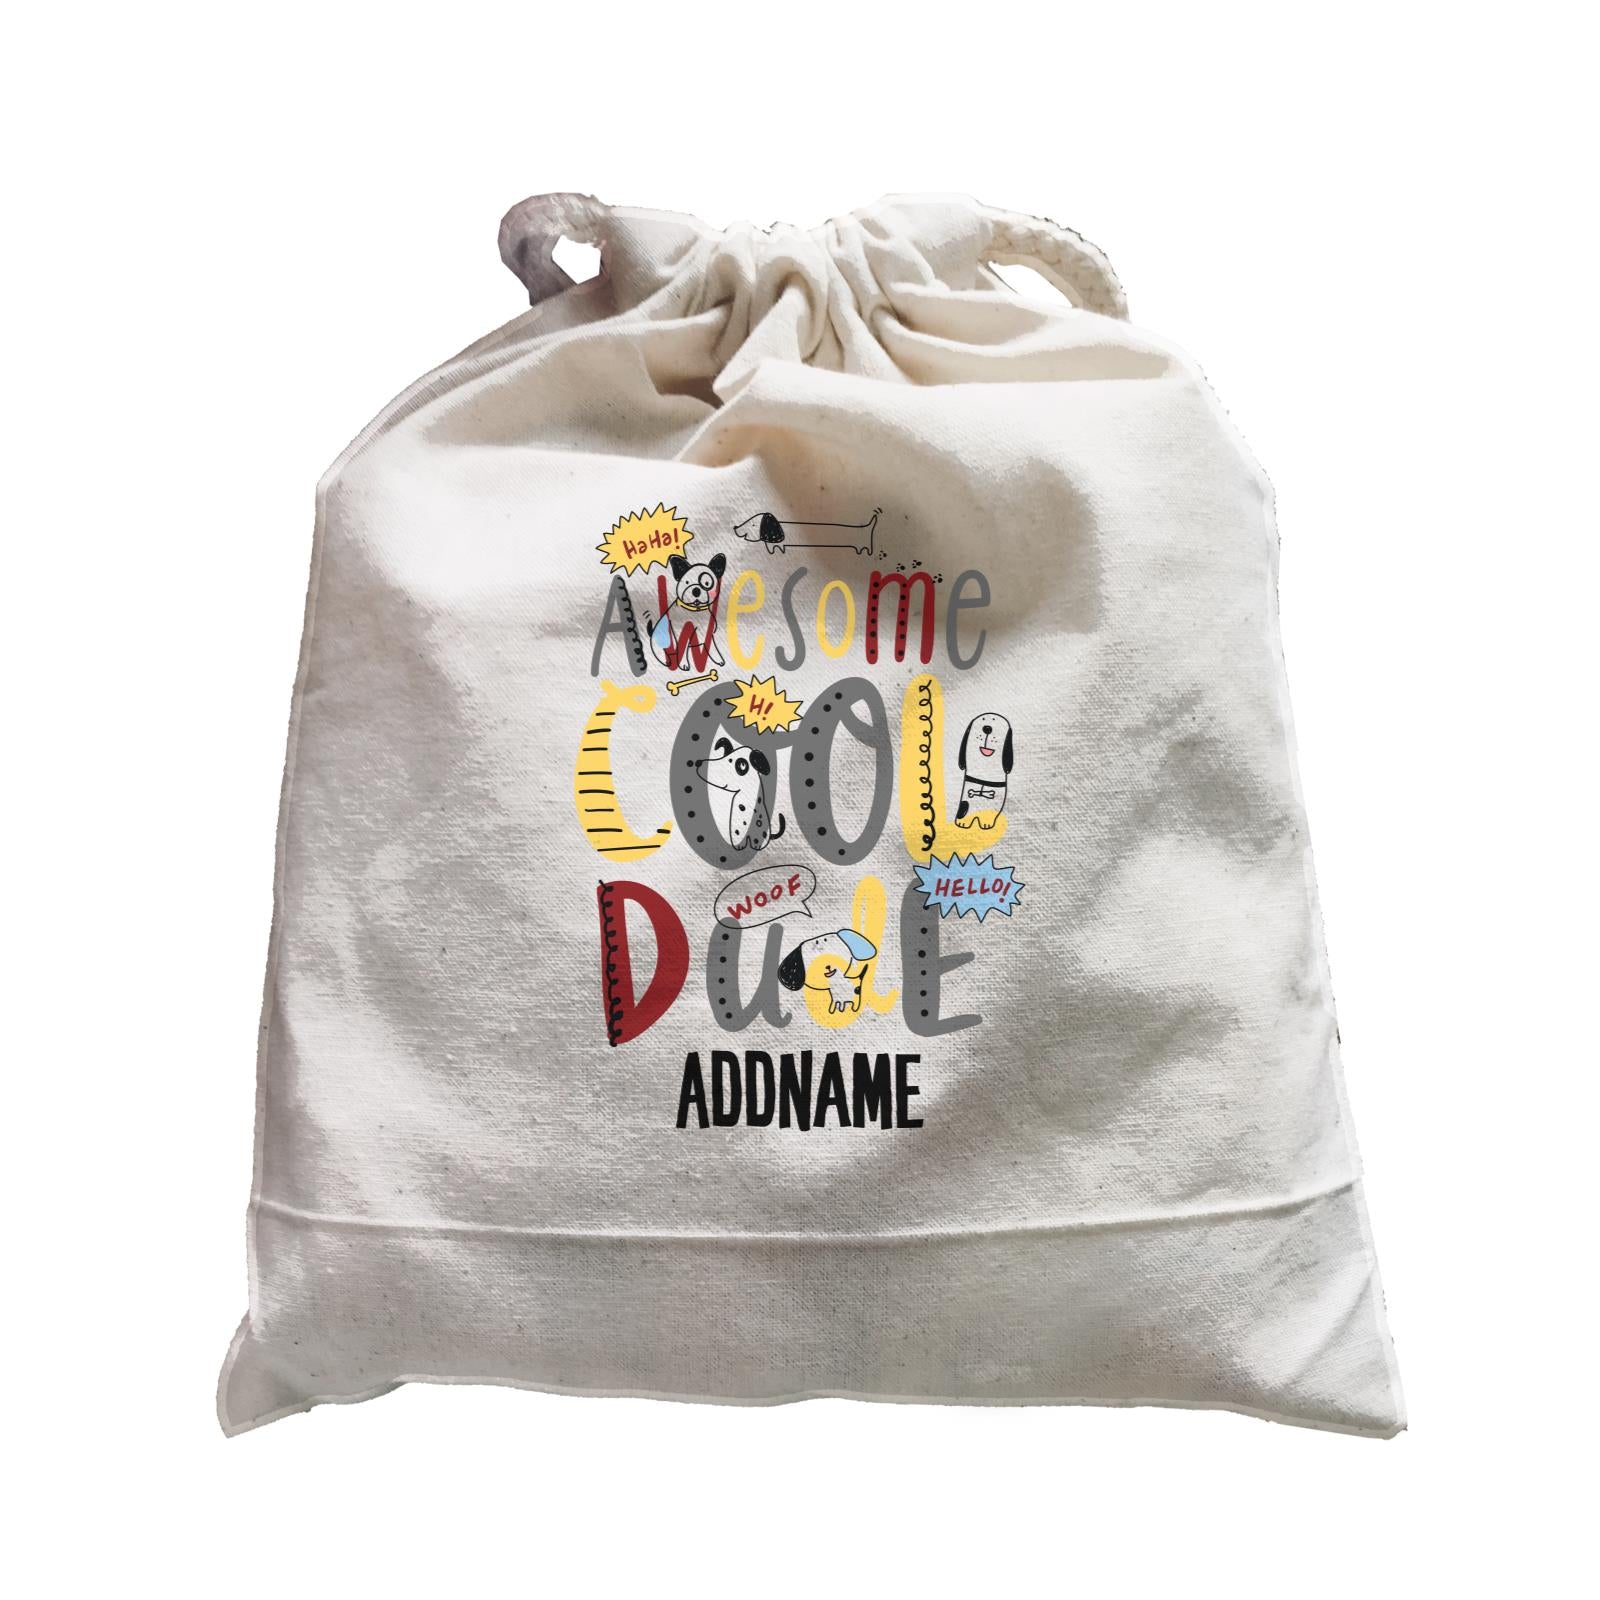 Cool Vibrant Series Awesome Cool Dude Addname Satchel